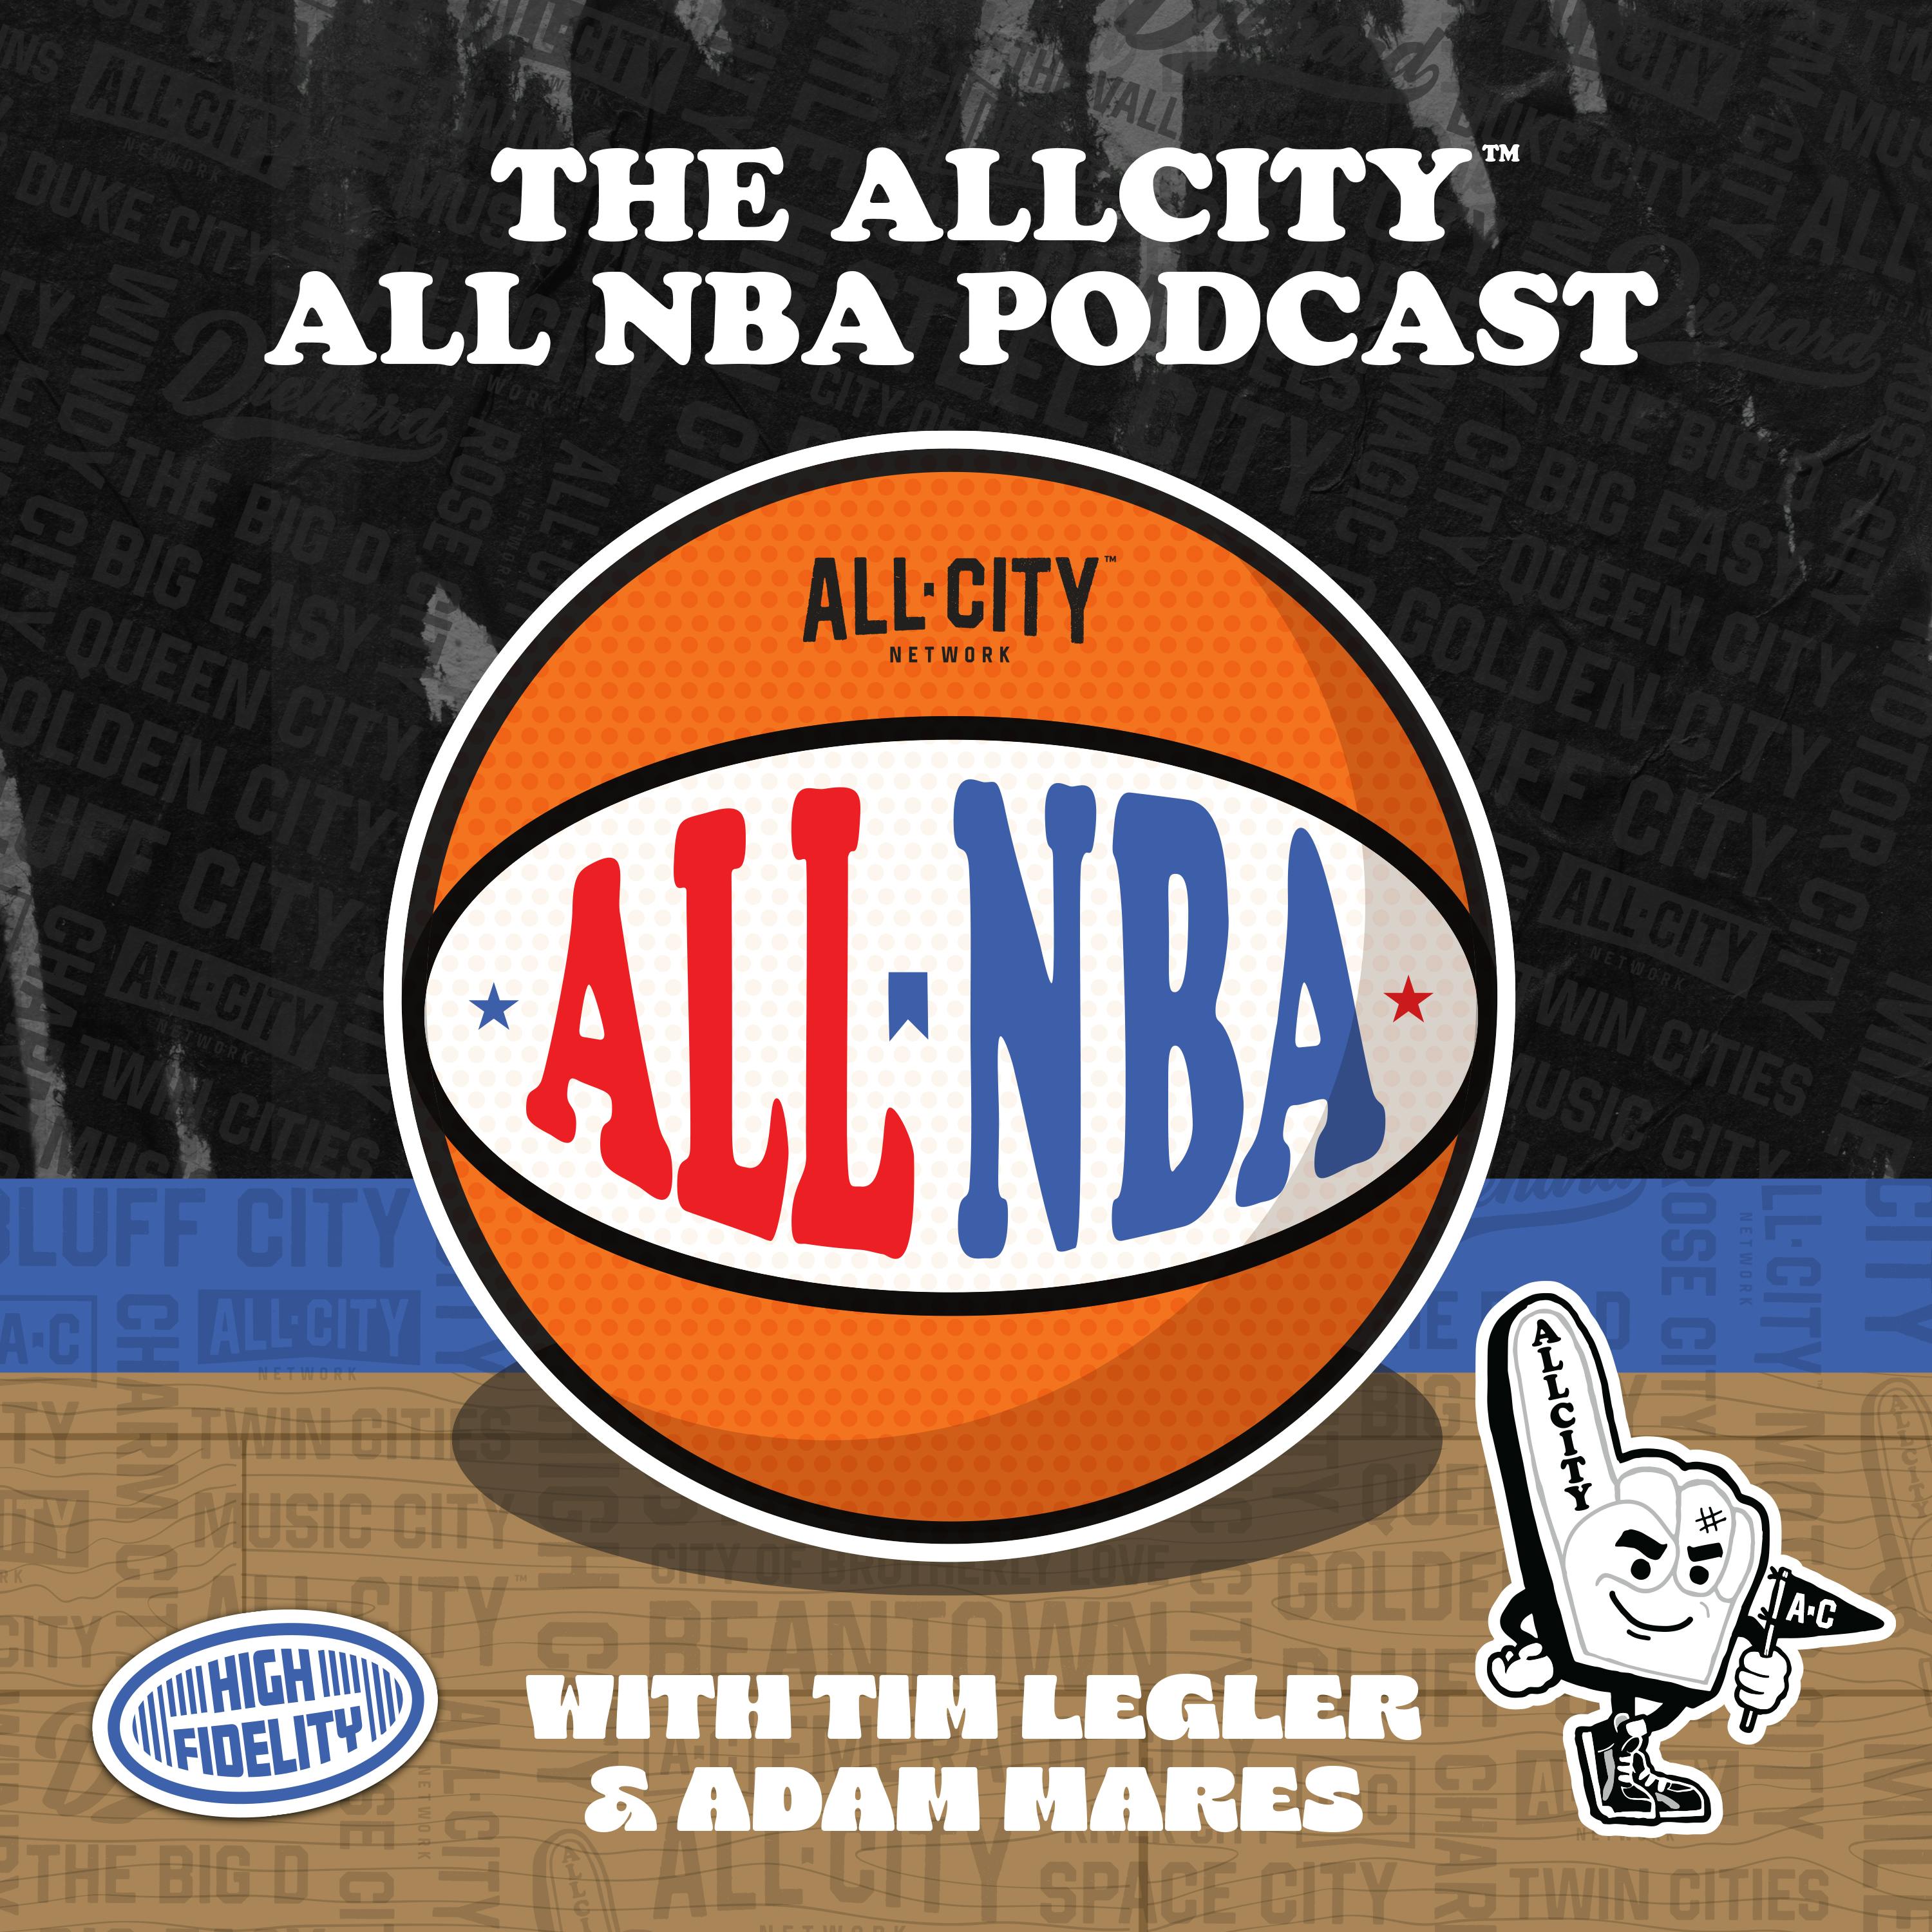 The ALL NBA Podcast: Can anyone catch the Celtics, Bucks and 76ers in the East?